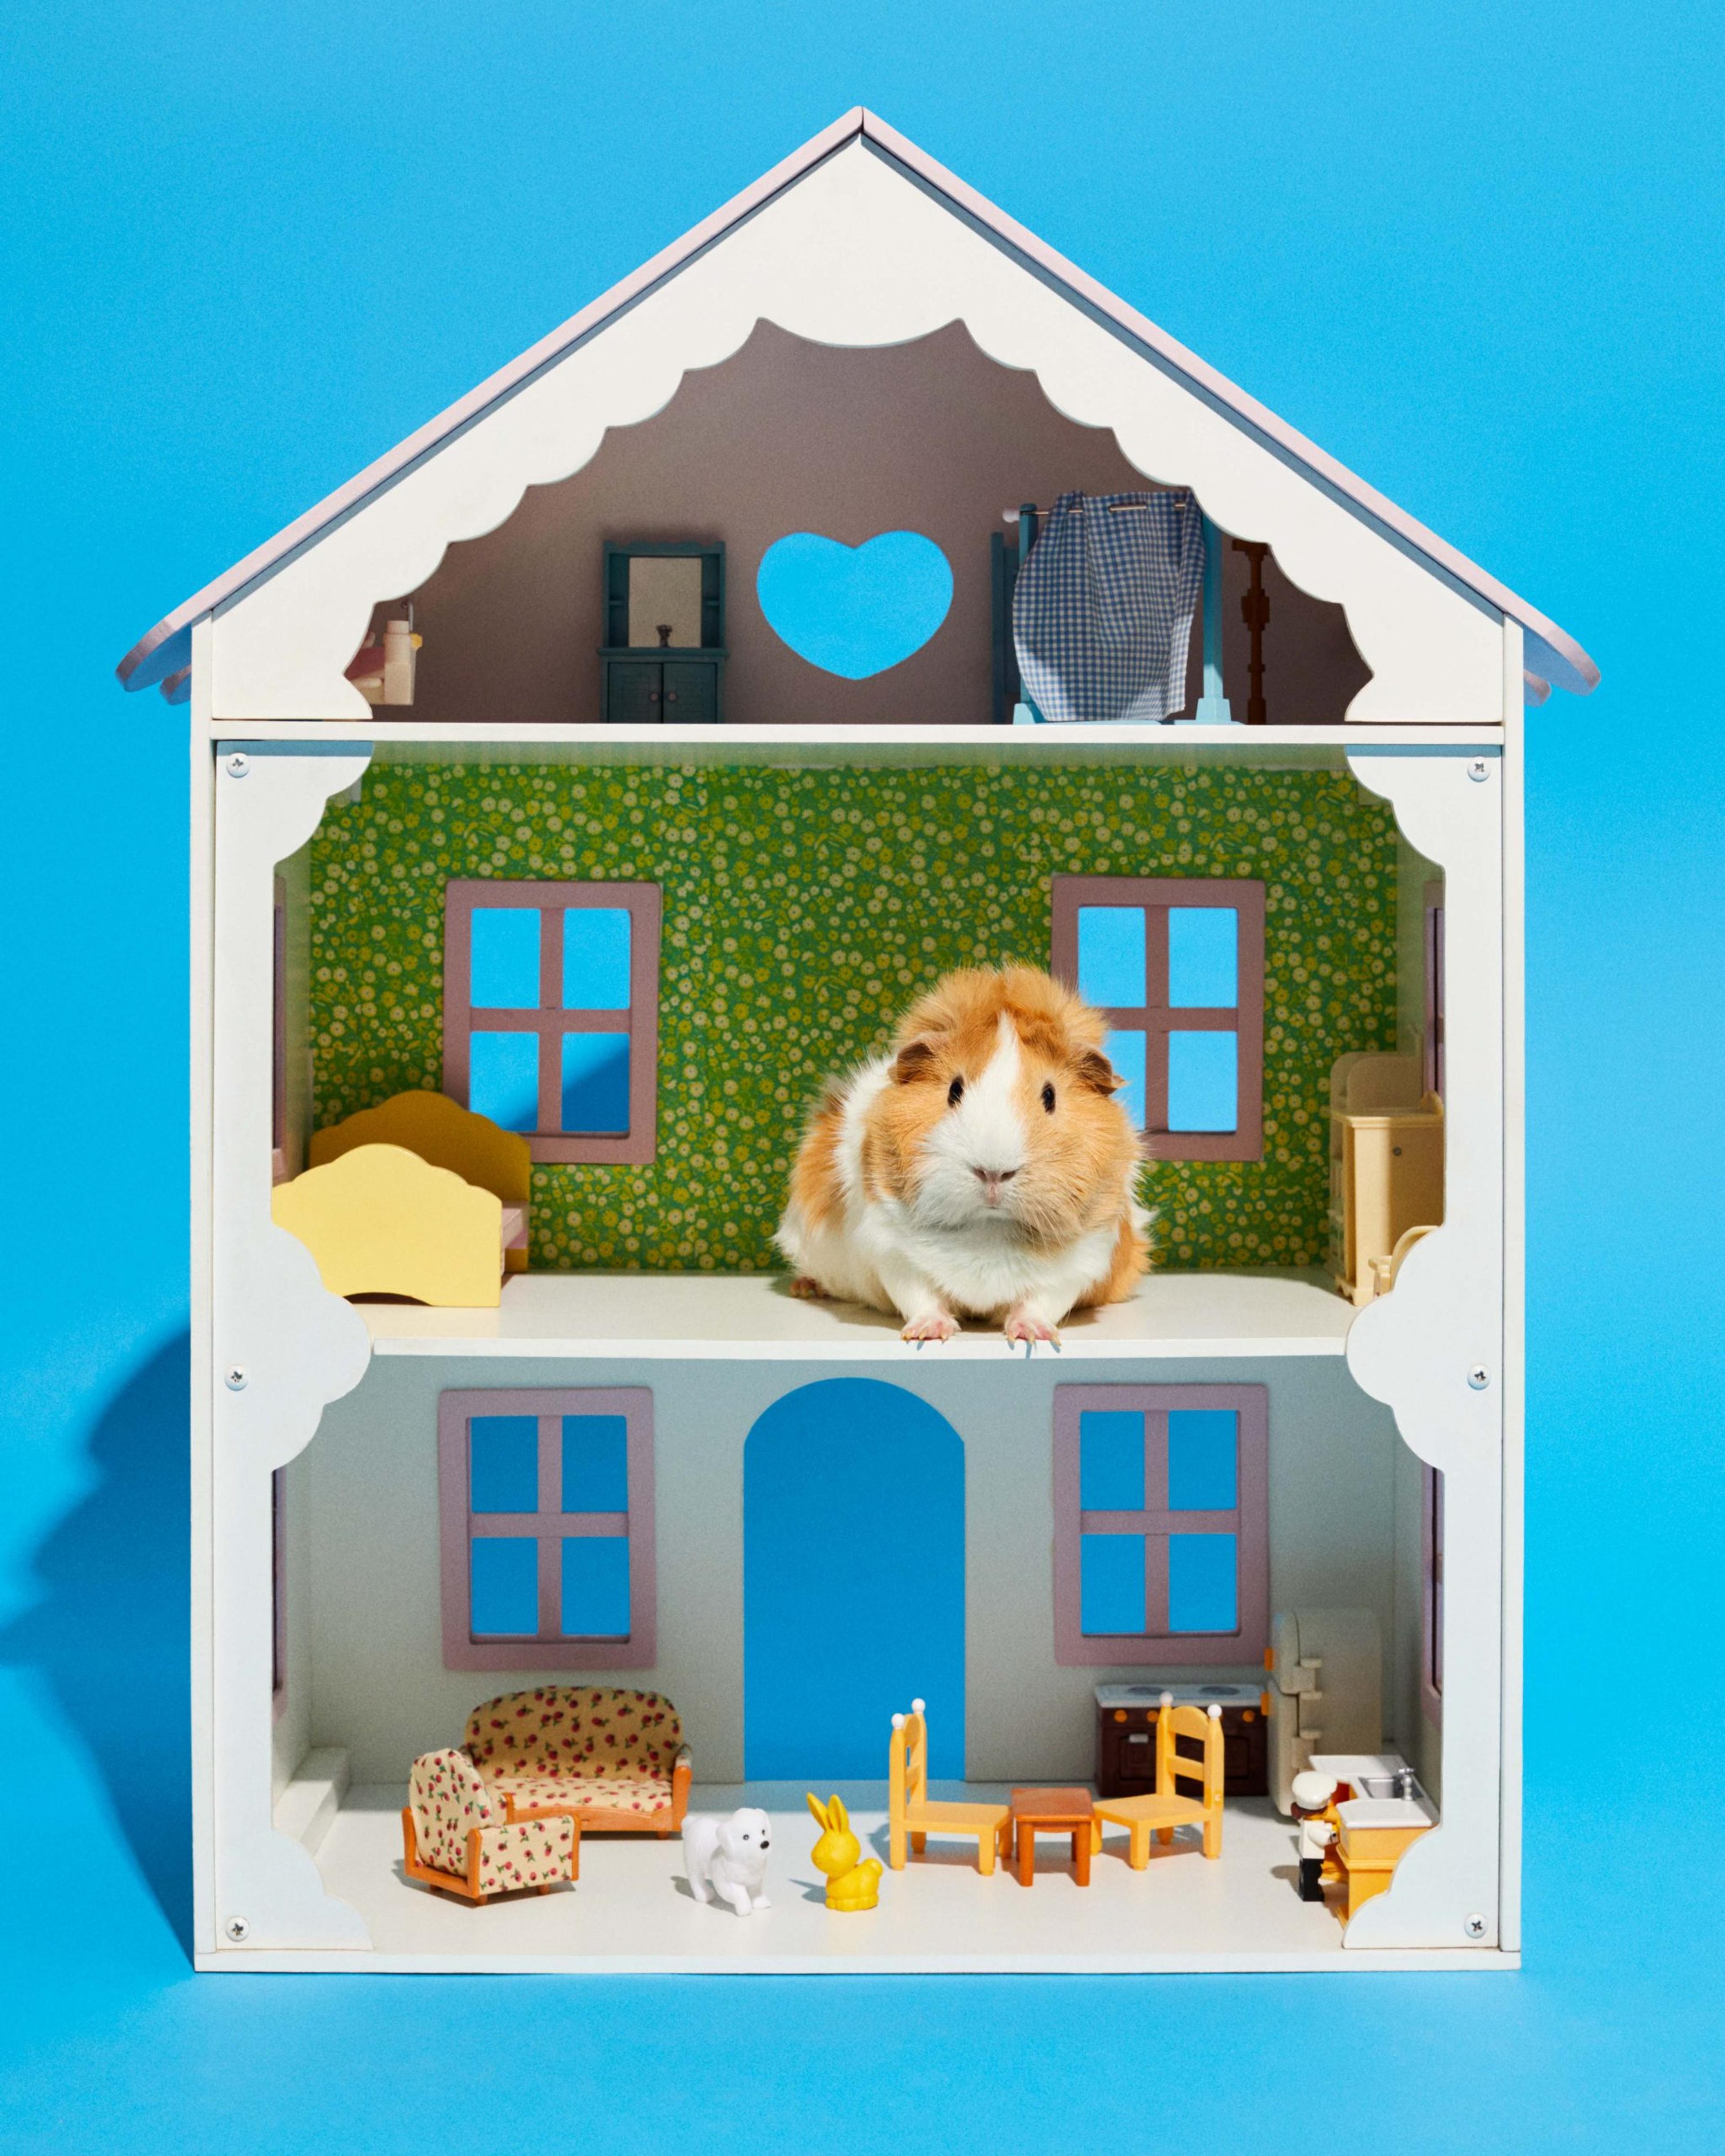 A photograph of a hamster in a white doll house against a bright blue background